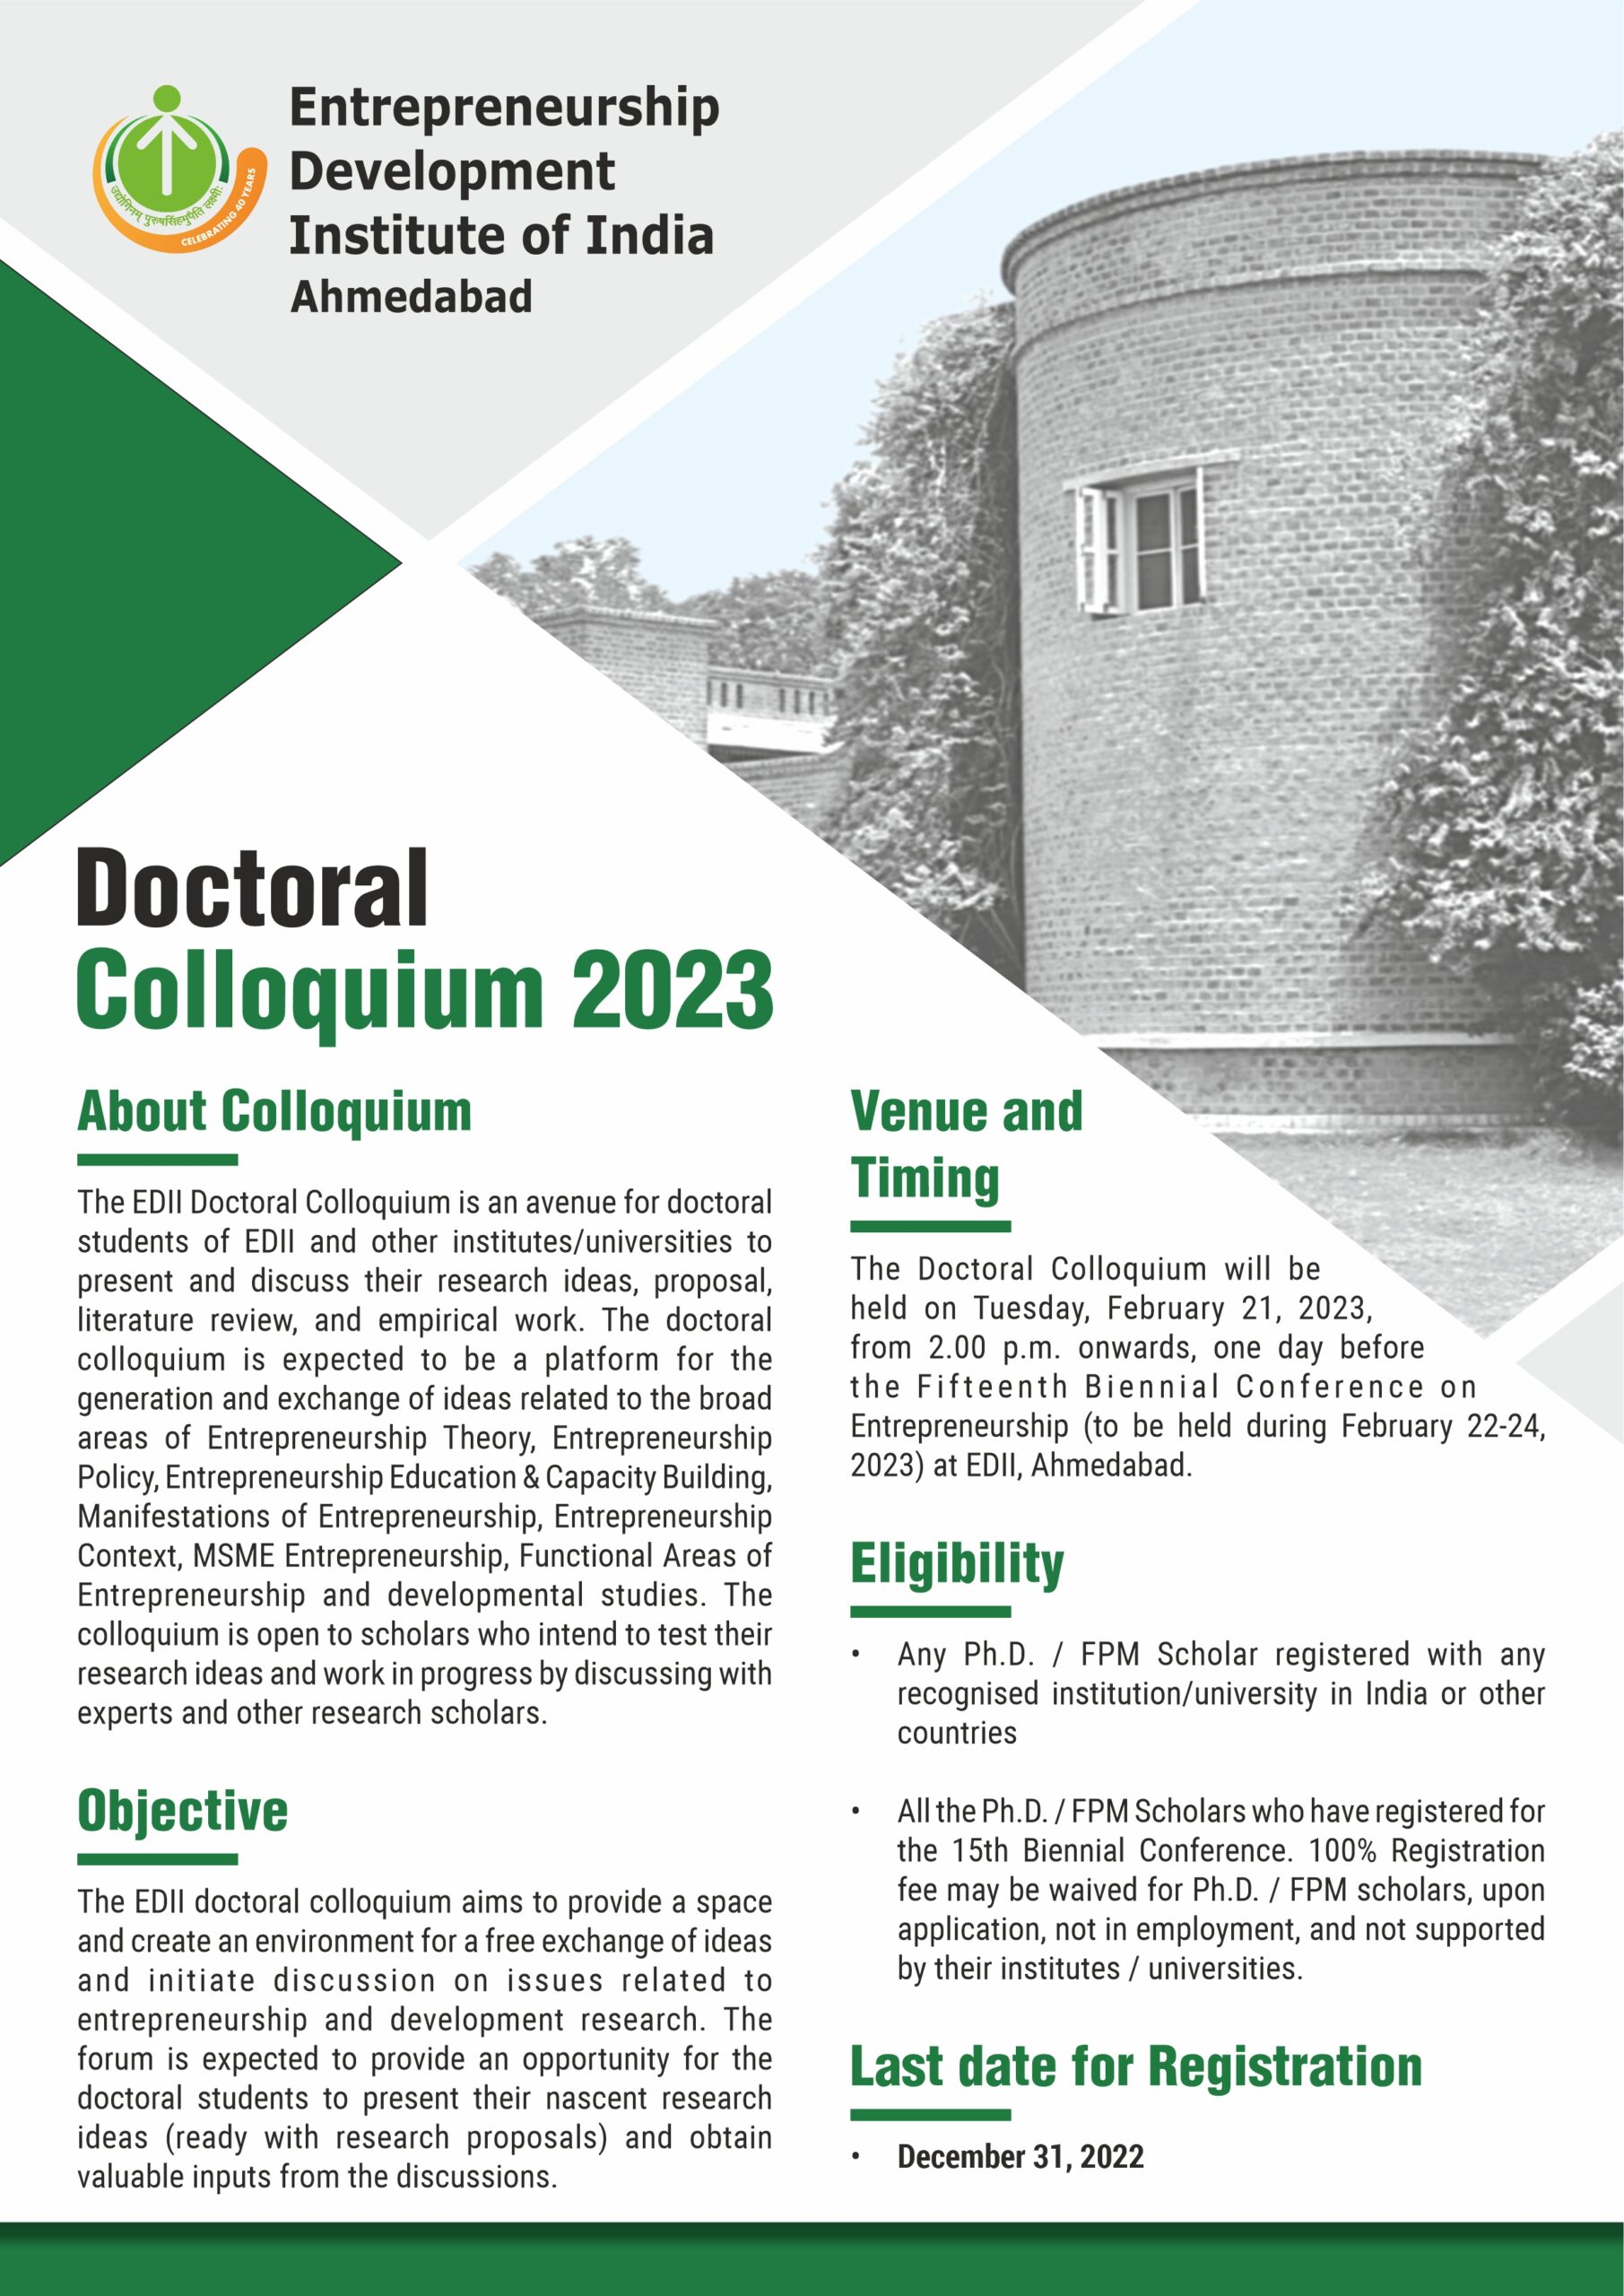 Doctoral Colloquium 2023 Page 1 Scaled 